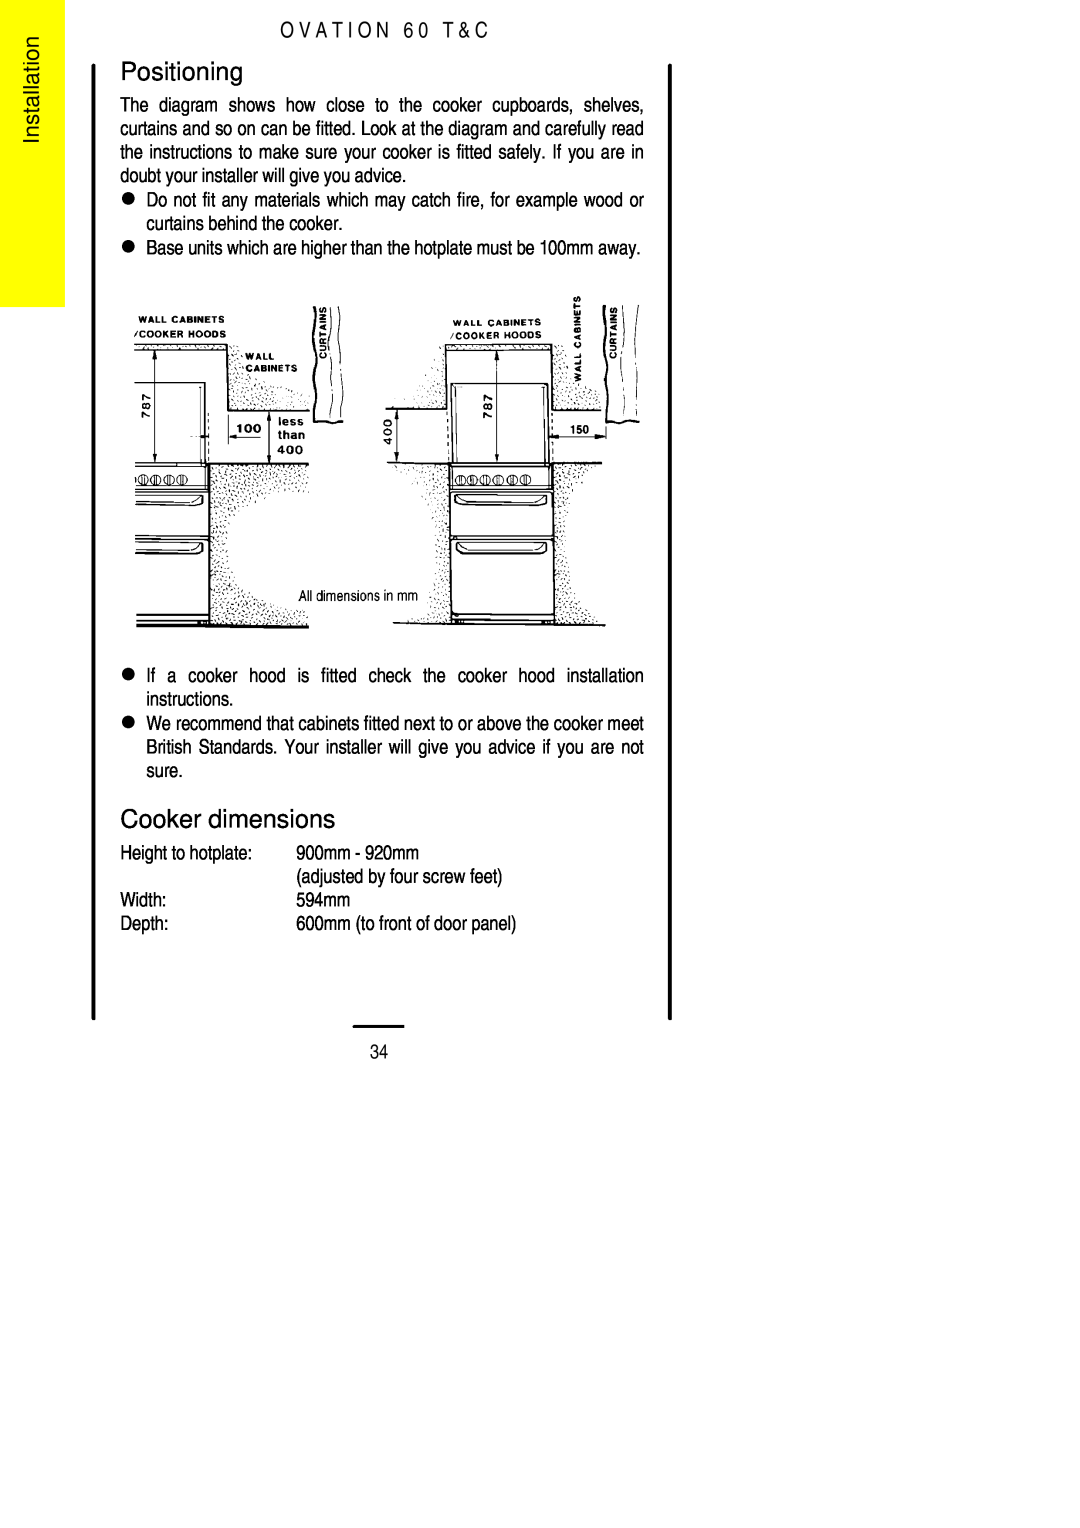 Electrolux 60 TC installation instructions Positioning, Cooker dimensions, Installation, O V A T I O N 6 0 T & C 